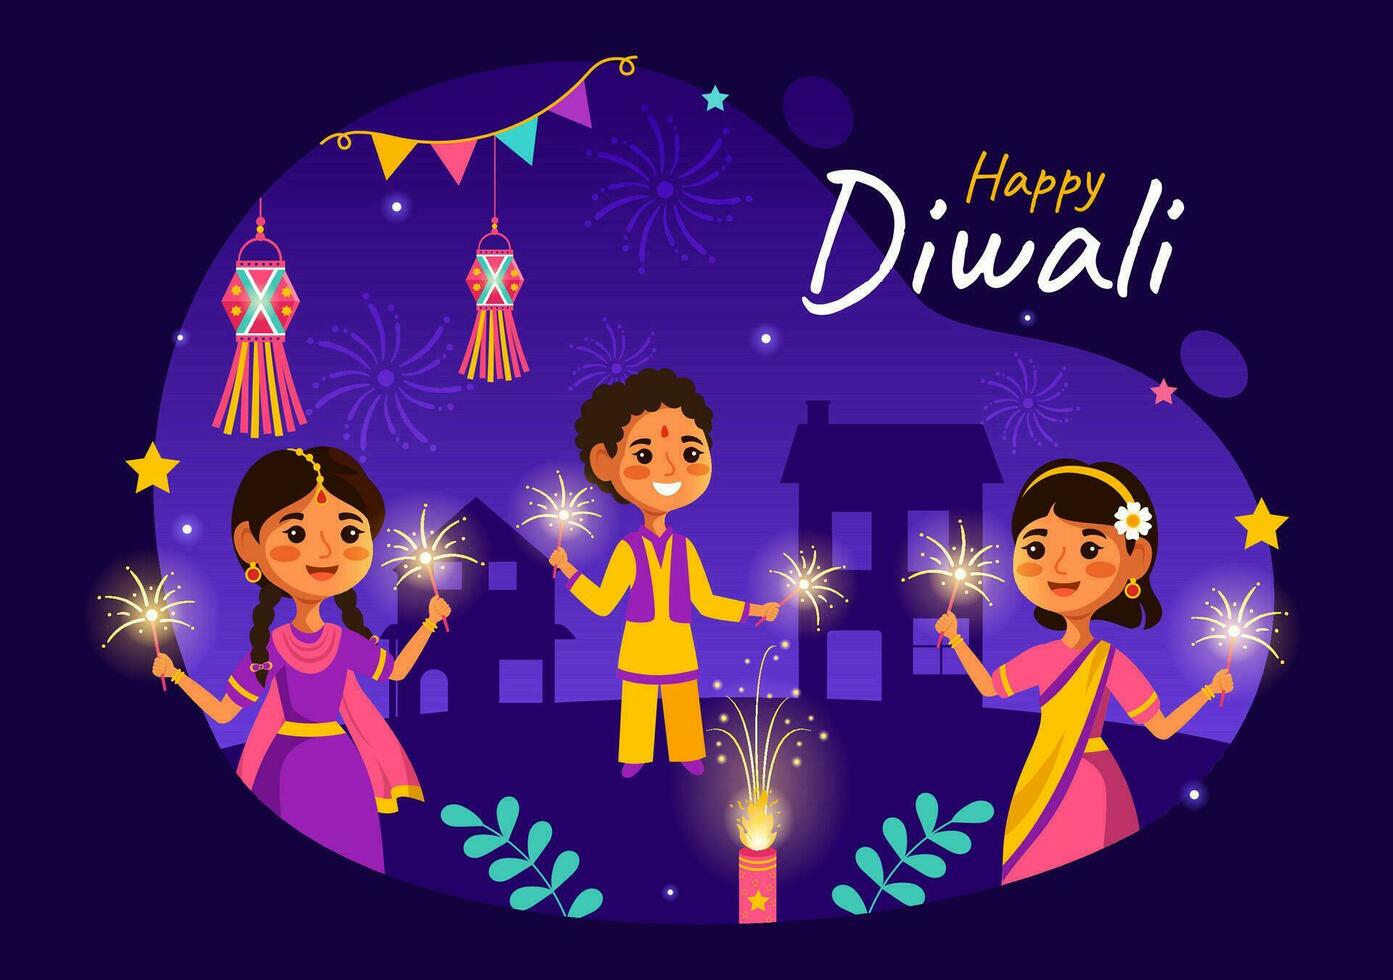 Happy Diwali Hindu Vector Illustration with Indian Rangoli and Fireworks Background for Light Festival of India in Flat Kids Cartoon Design